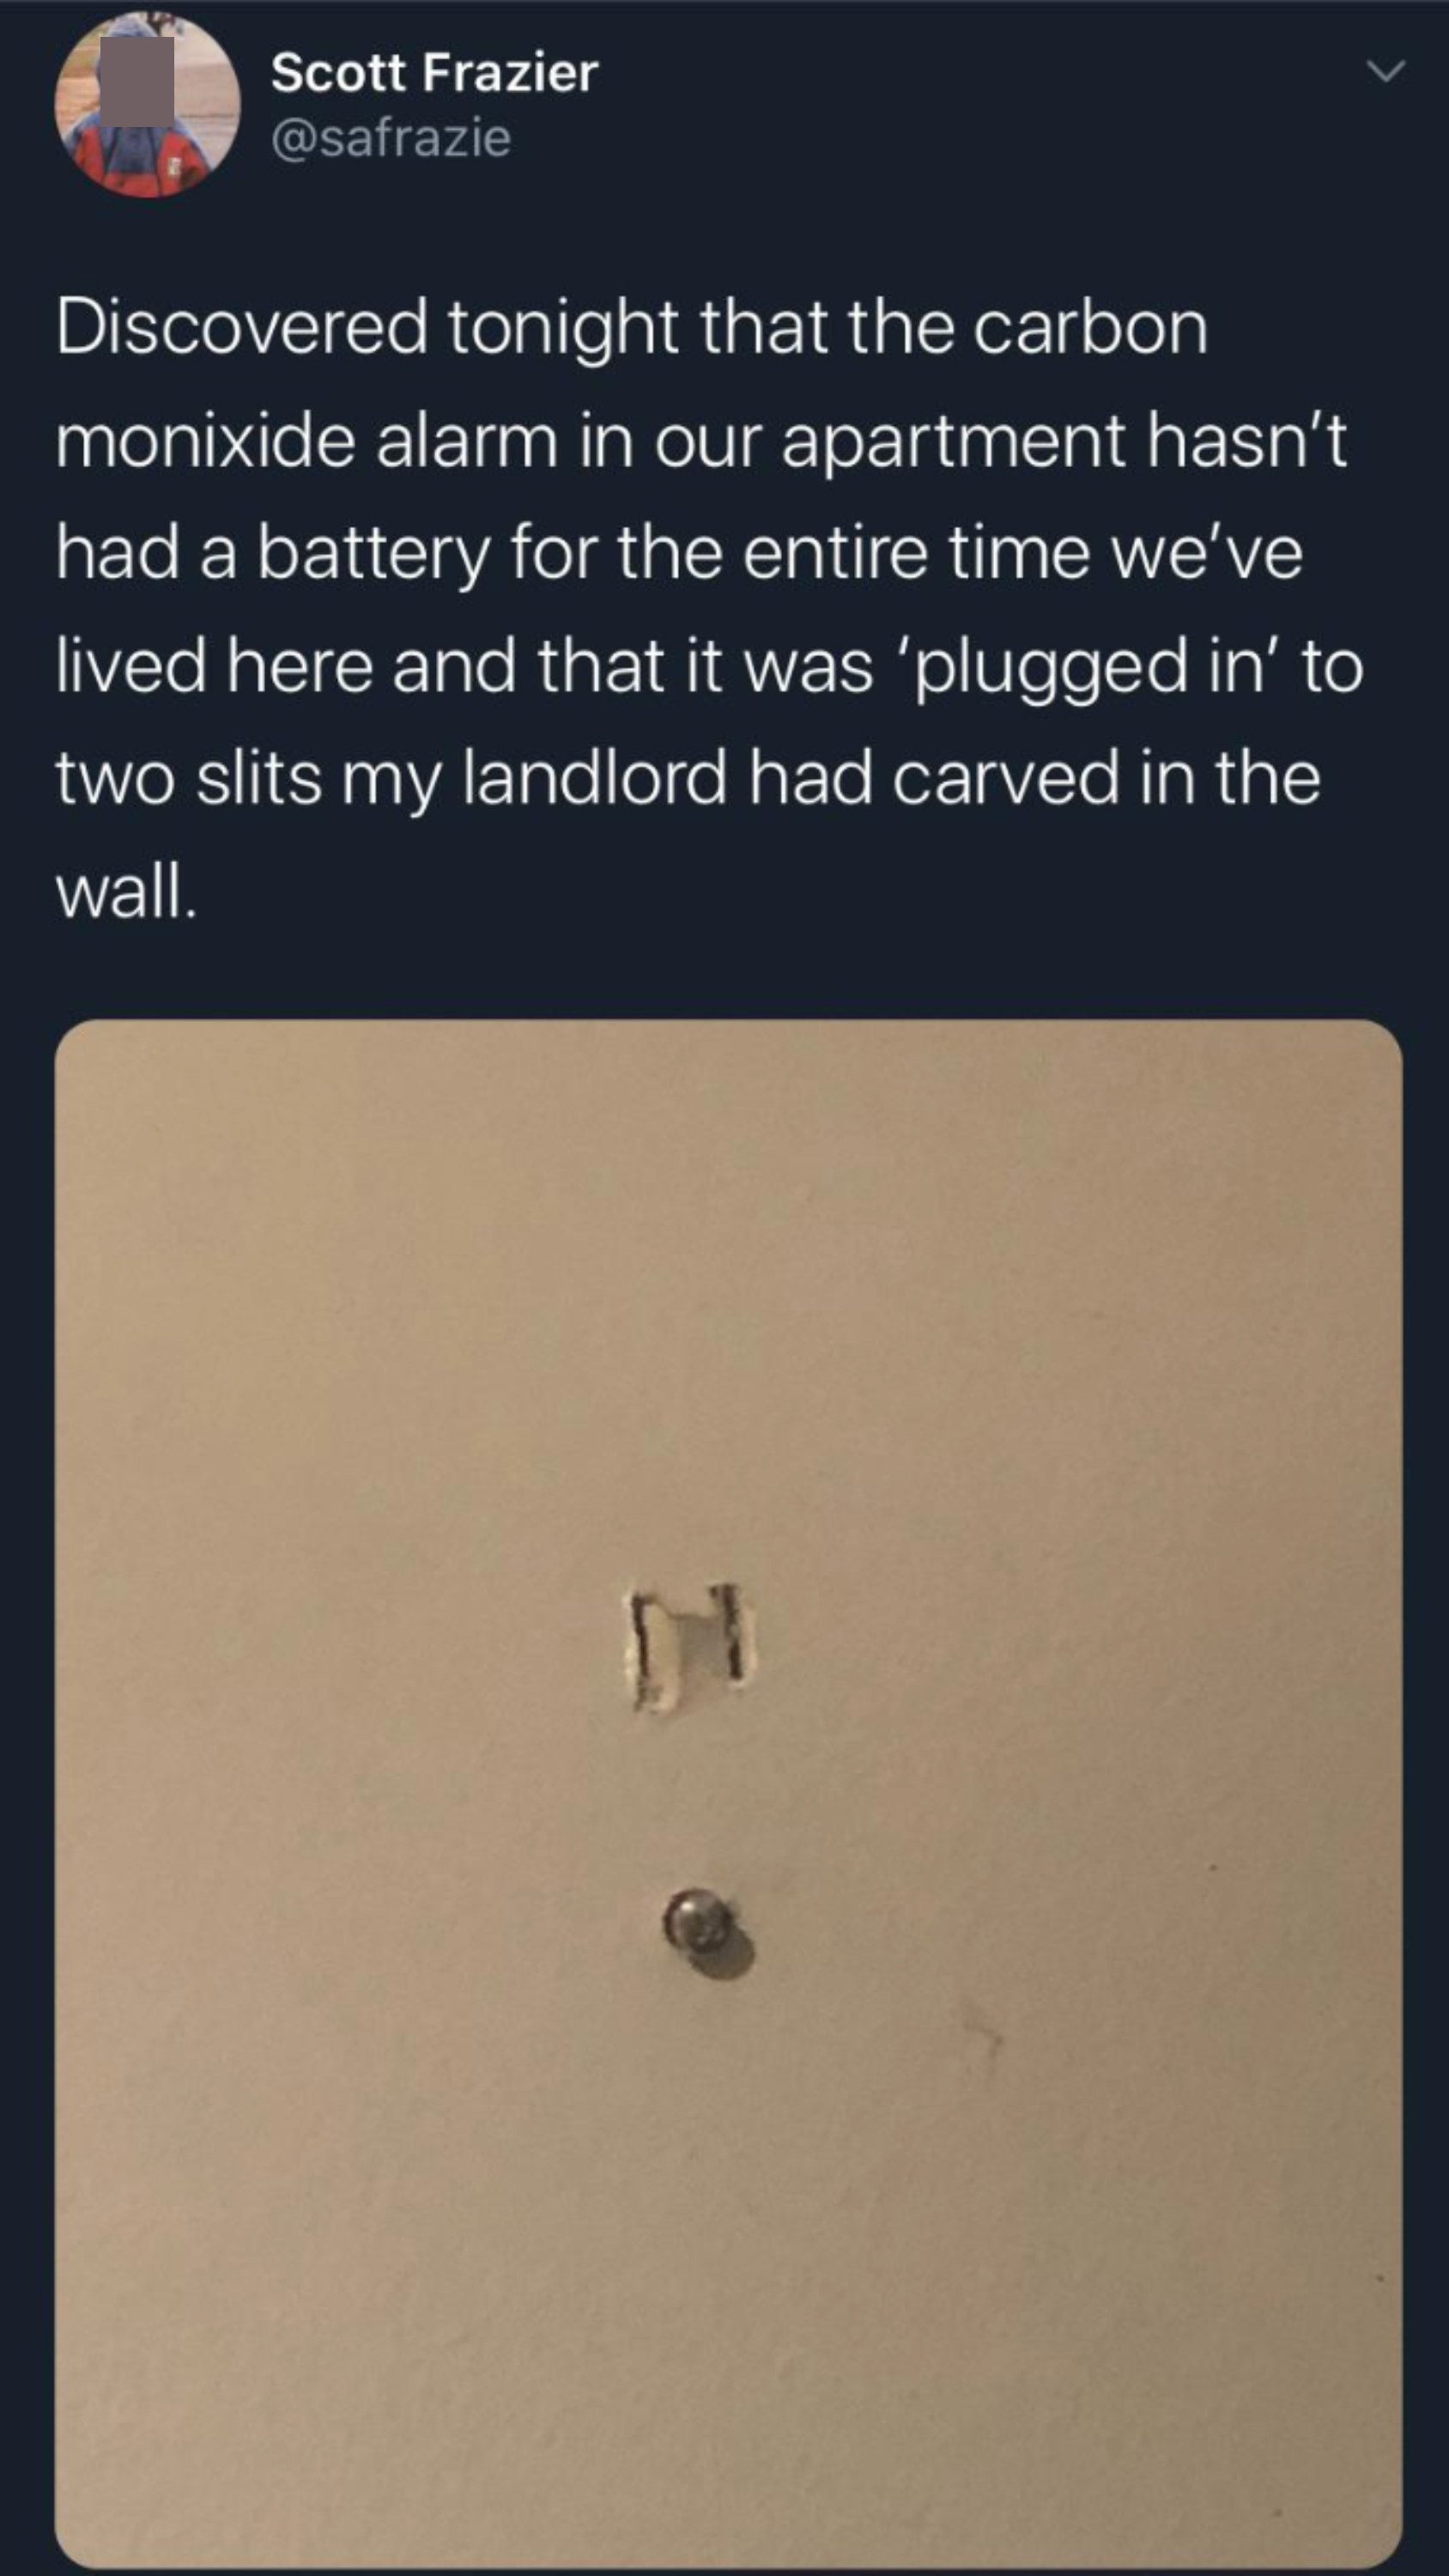 carbon monoxide detector hasn&#x27;t had a battery since they moved into the apartment, and the landlord had it &quot;plugged into&quot; two slits they had carved in the wall